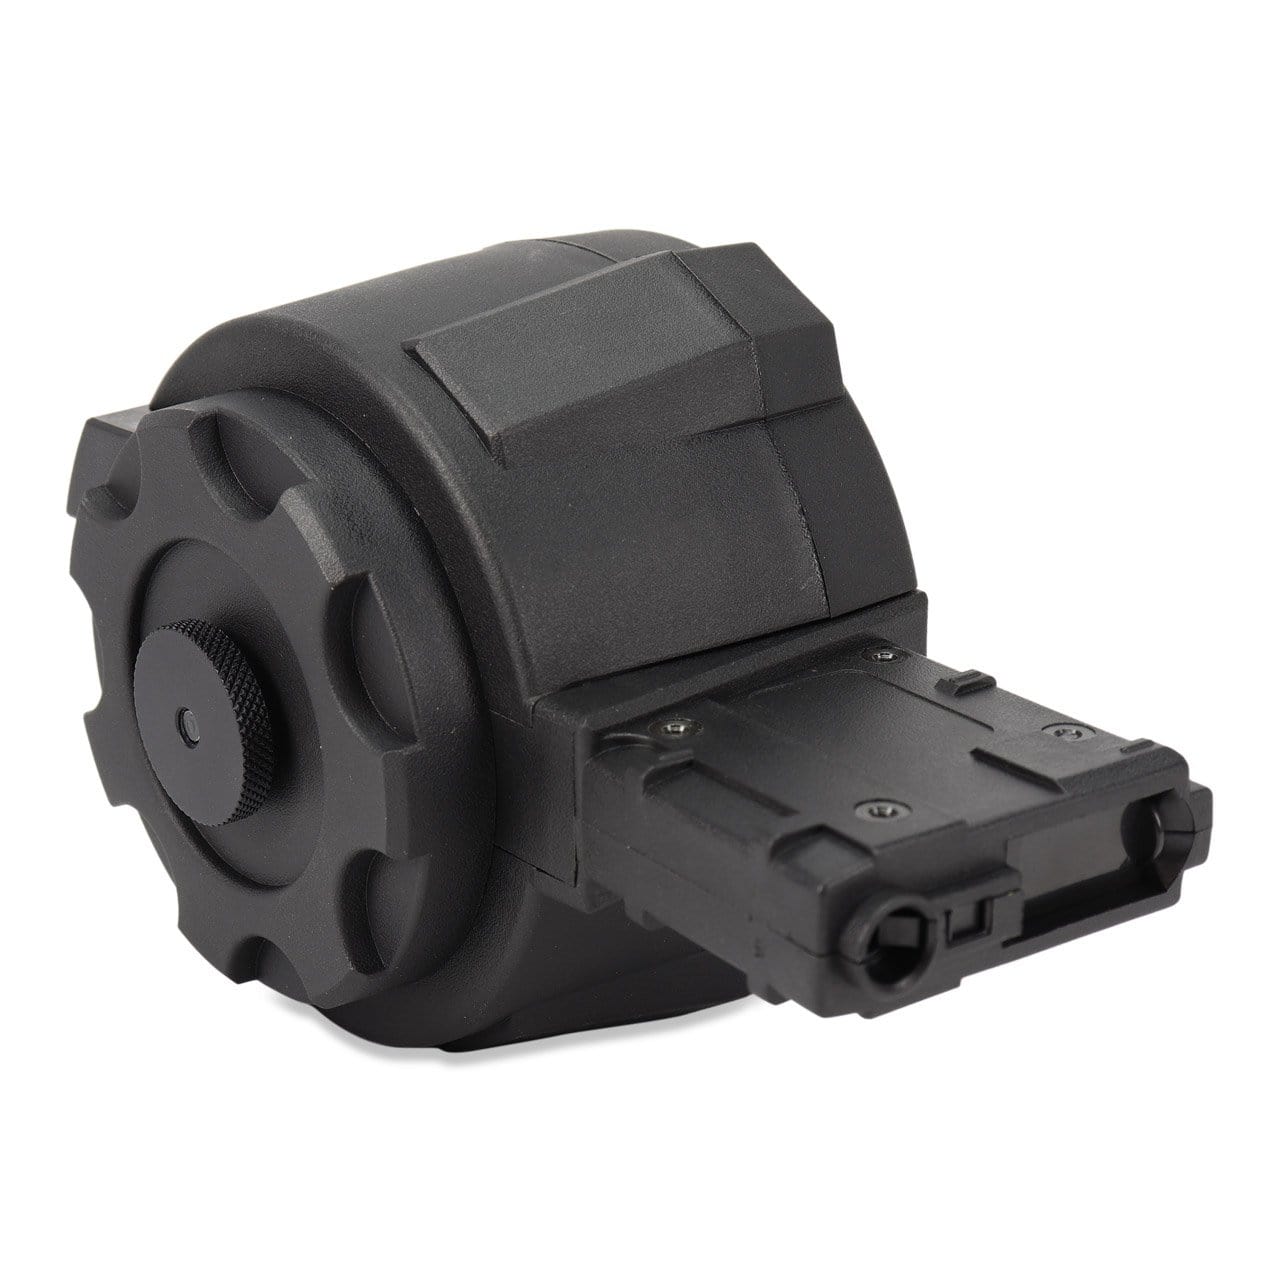 Angel Custom 1500 Round Firestorm Airsoft Drum Flashmag (Color: Black / M4 Adapter) - Eminent Paintball And Airsoft